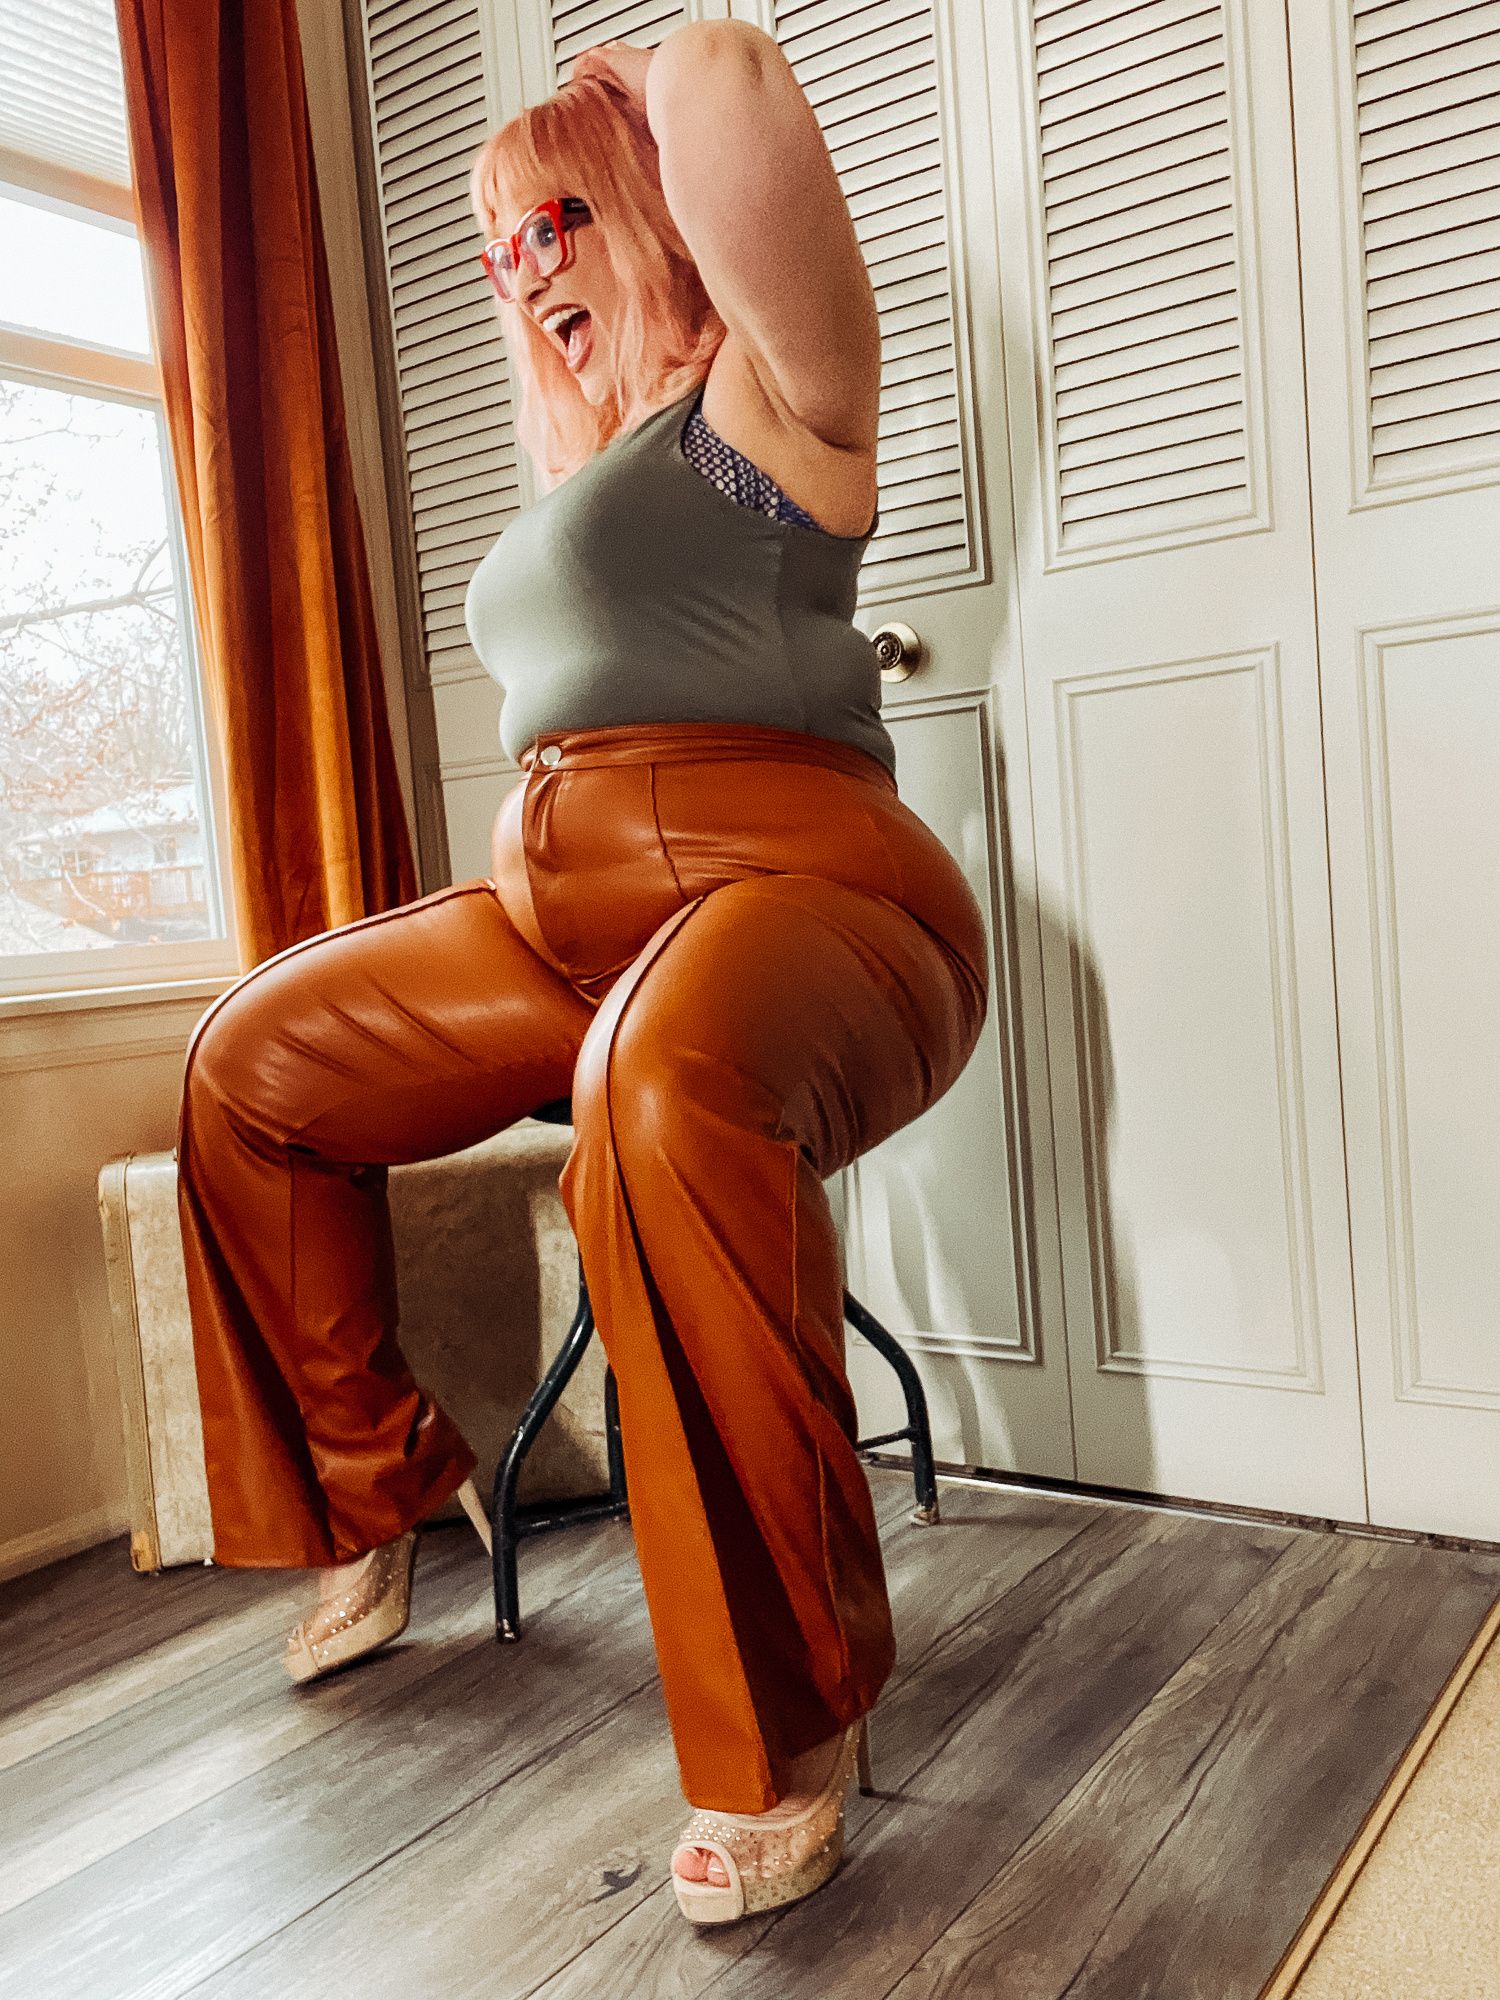 BBW in tight leather pants leans over and shows off her ass #22